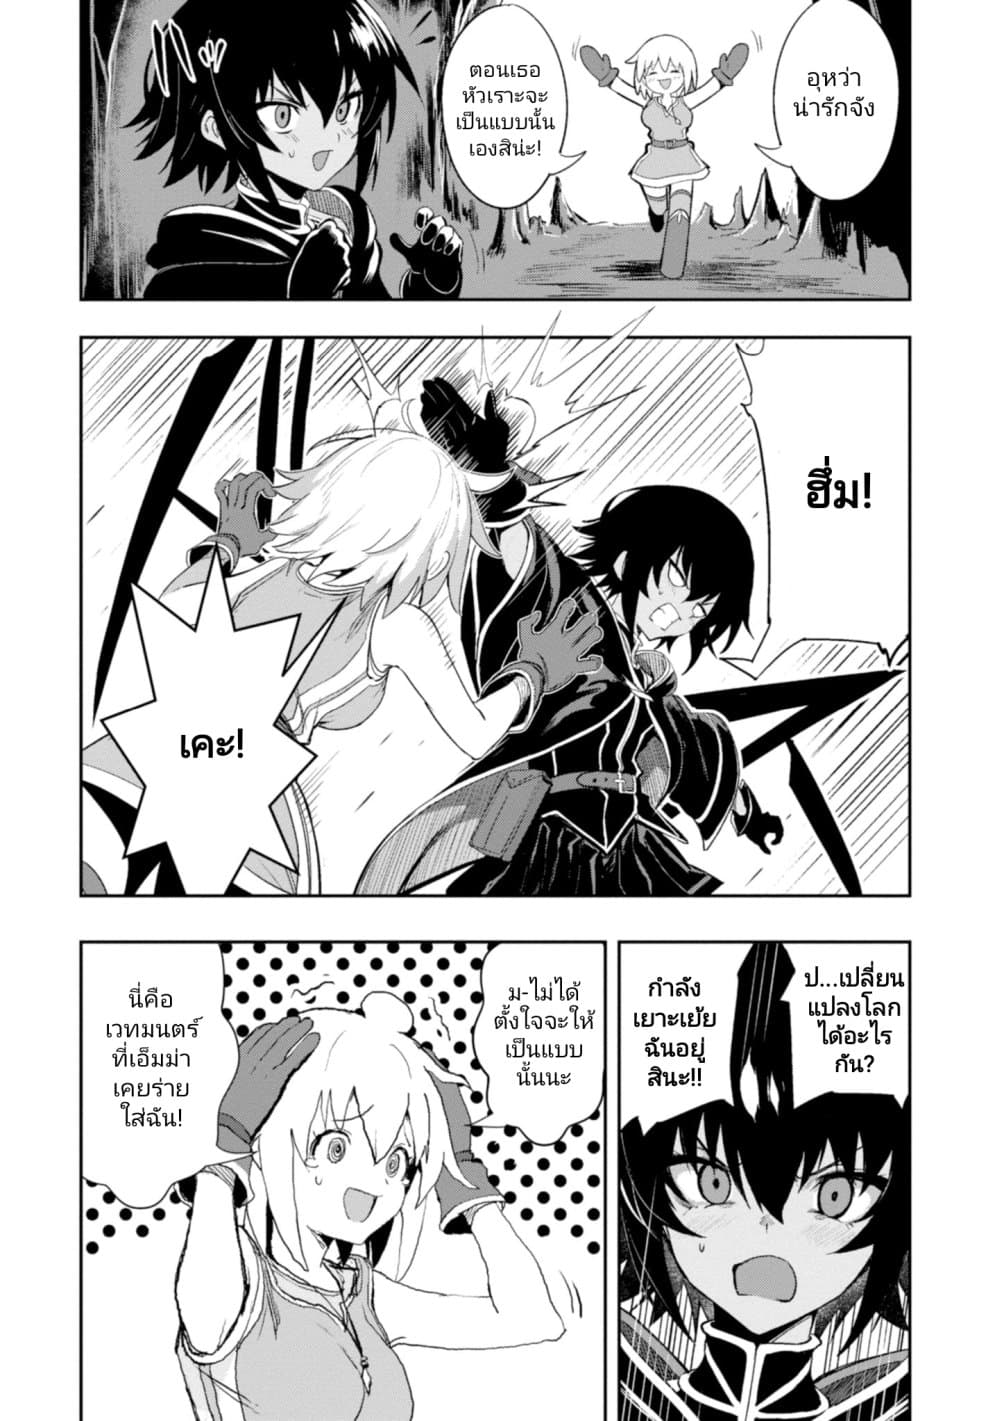 Witch Guild Fantasia 4 (17)